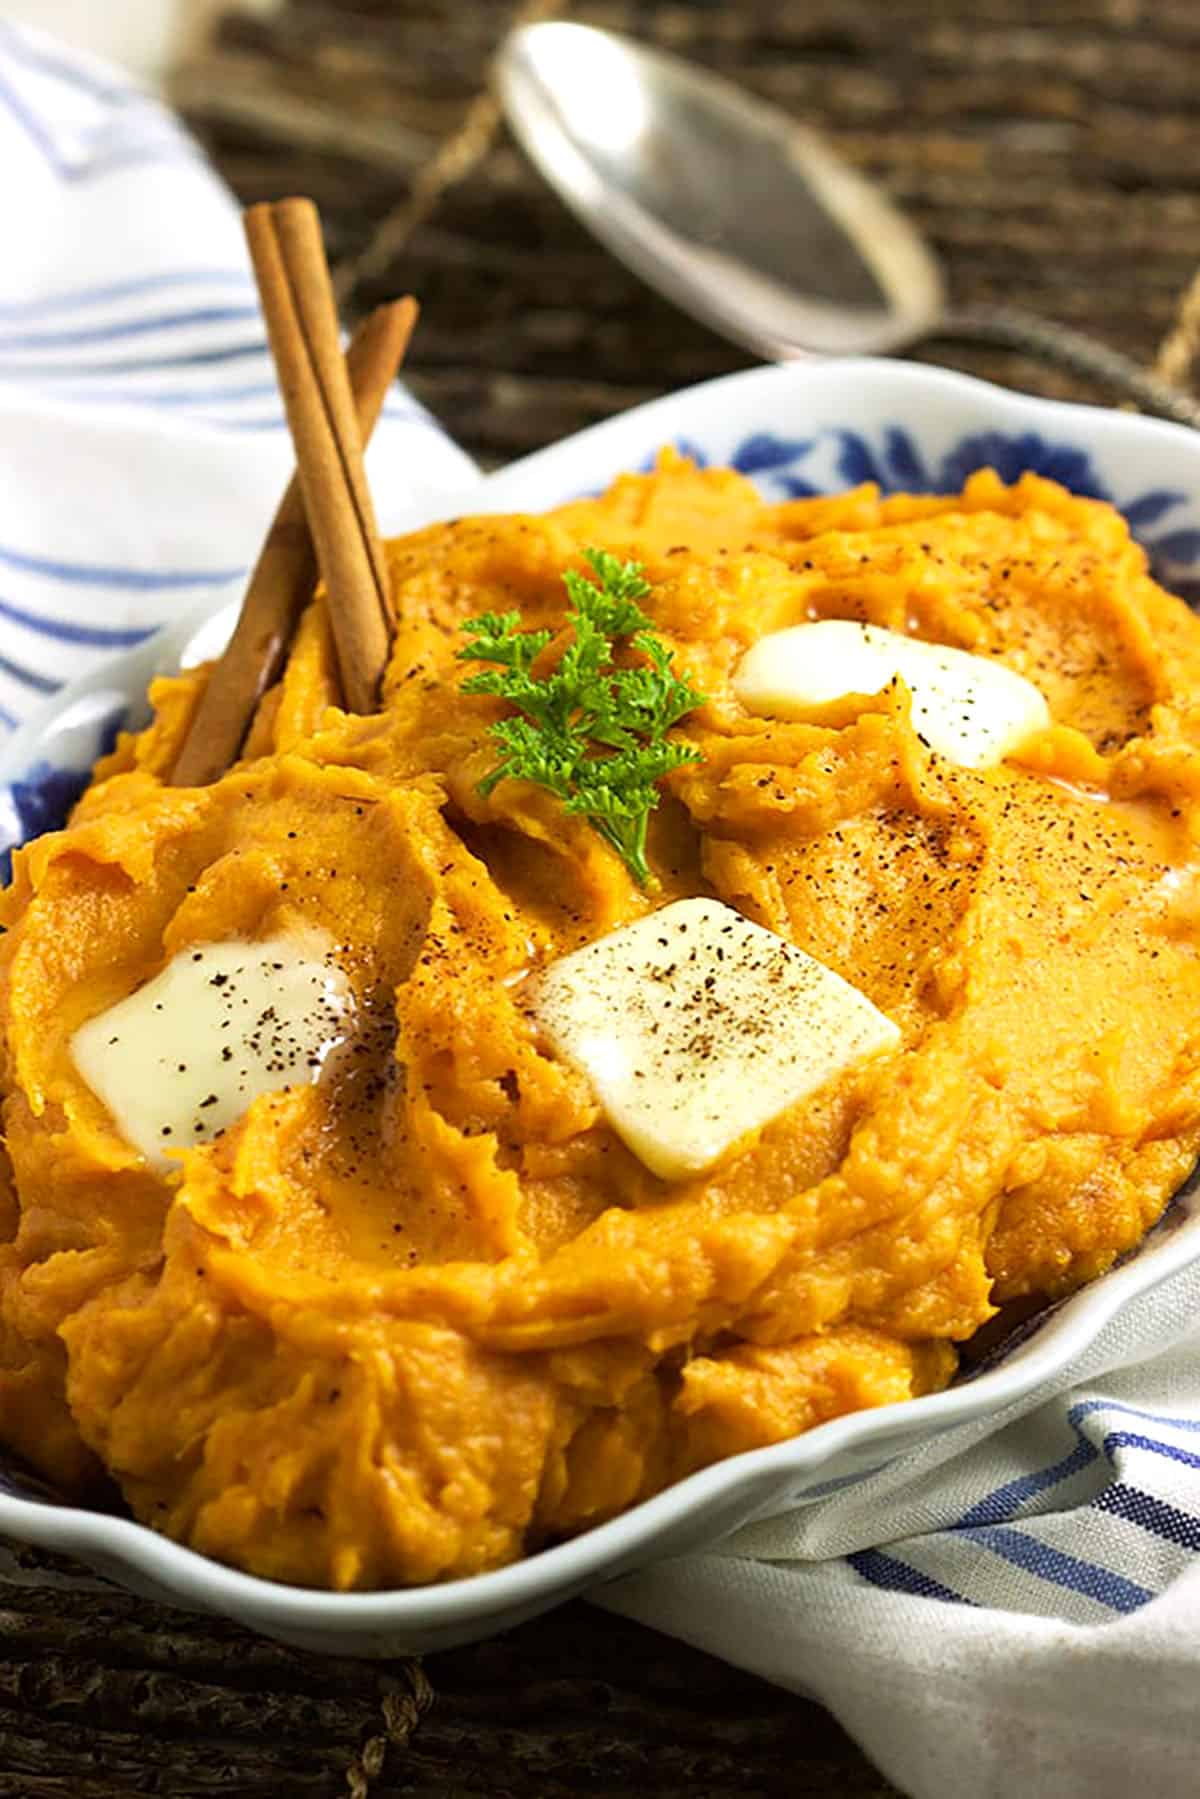 Mashed Sweet potatoes in an oval blue and white bowl topped with three pats of butter and a sprig of parsley.